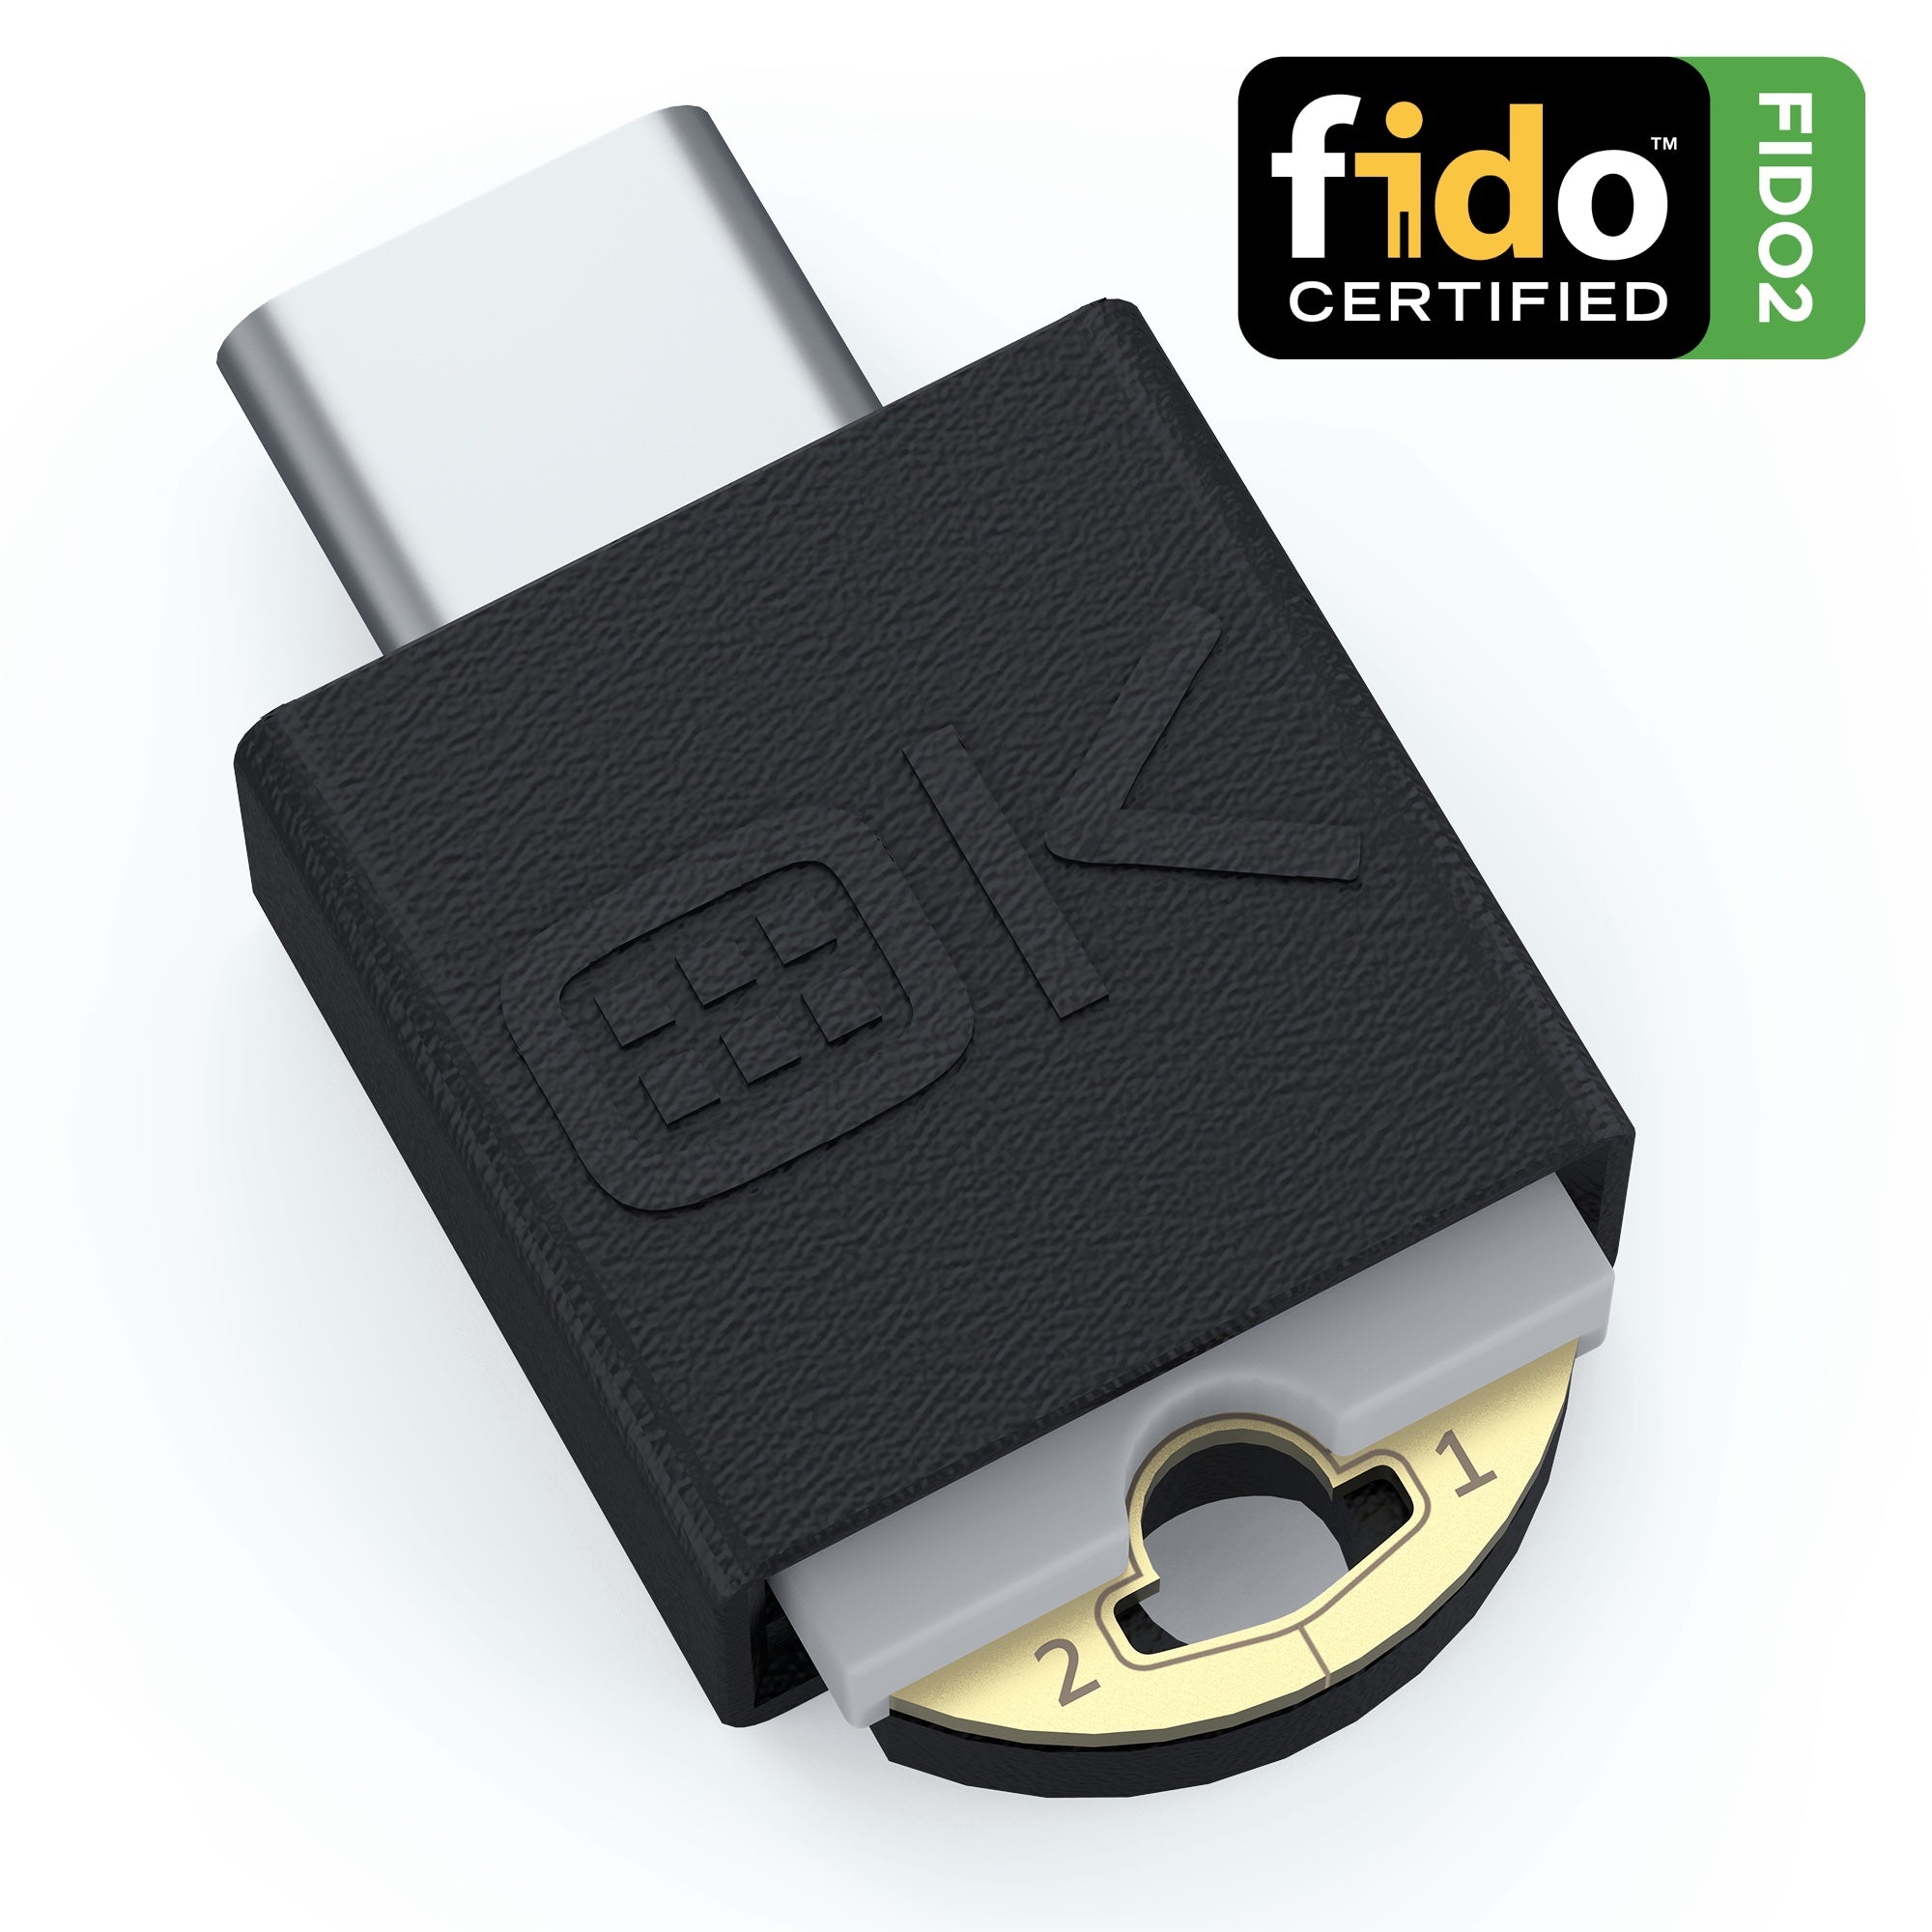 Will Yubikey Work with USB-C to Lightning Adapter? - Password Manager -  Bitwarden Community Forums